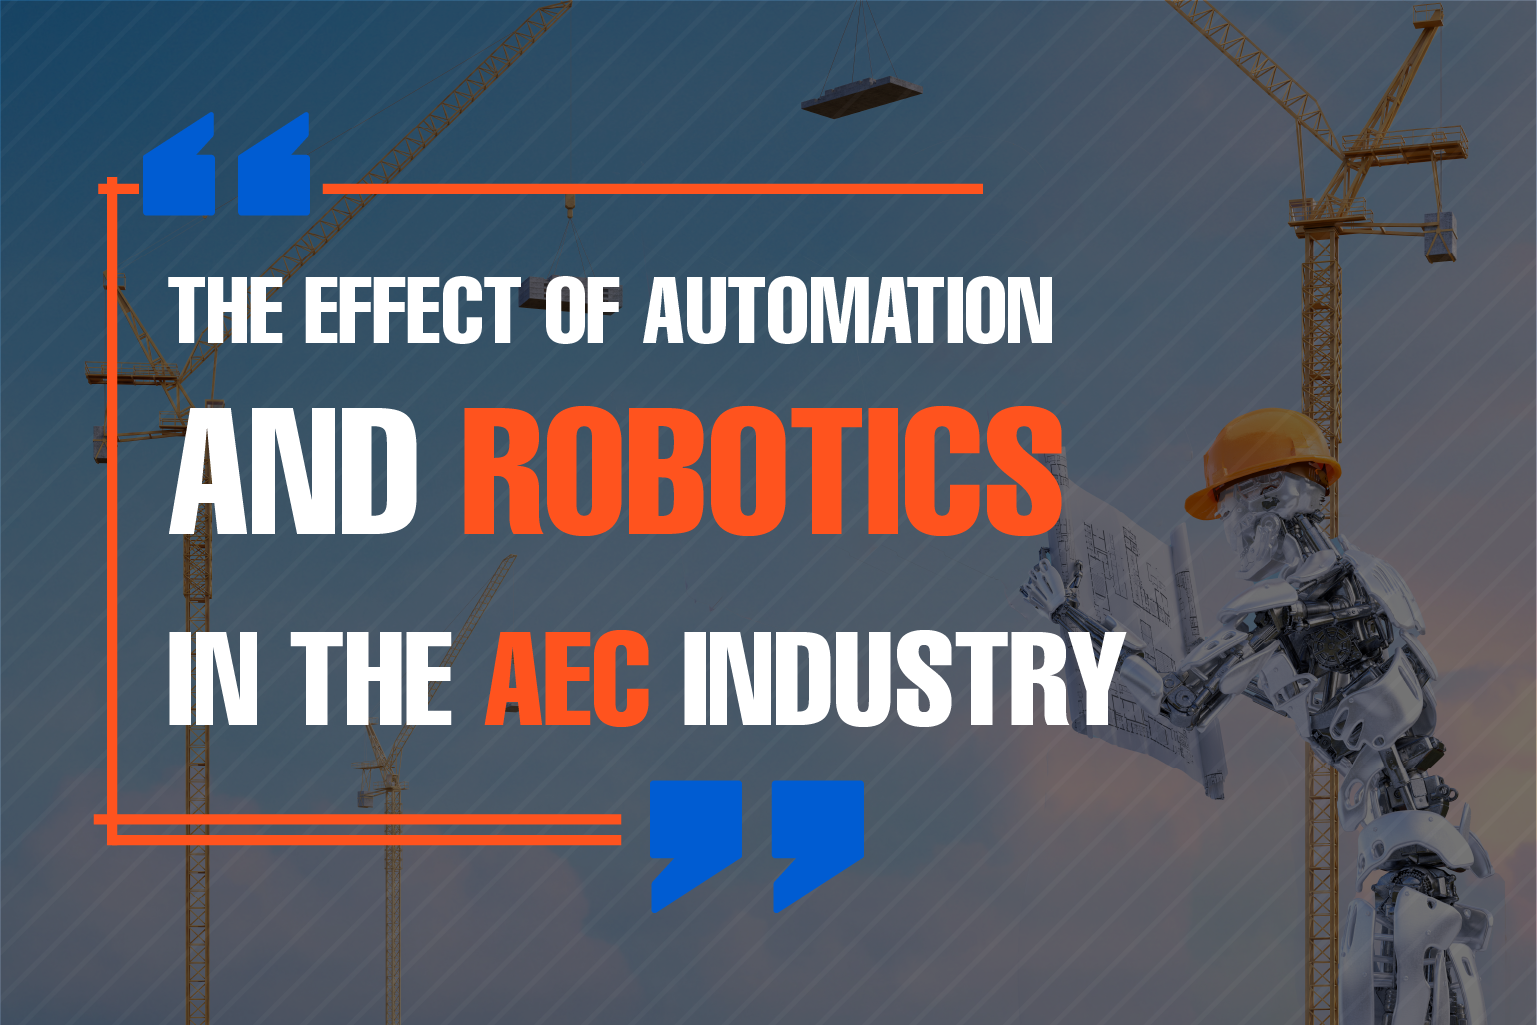 The effect of Automation and robotics in the AEC Industry